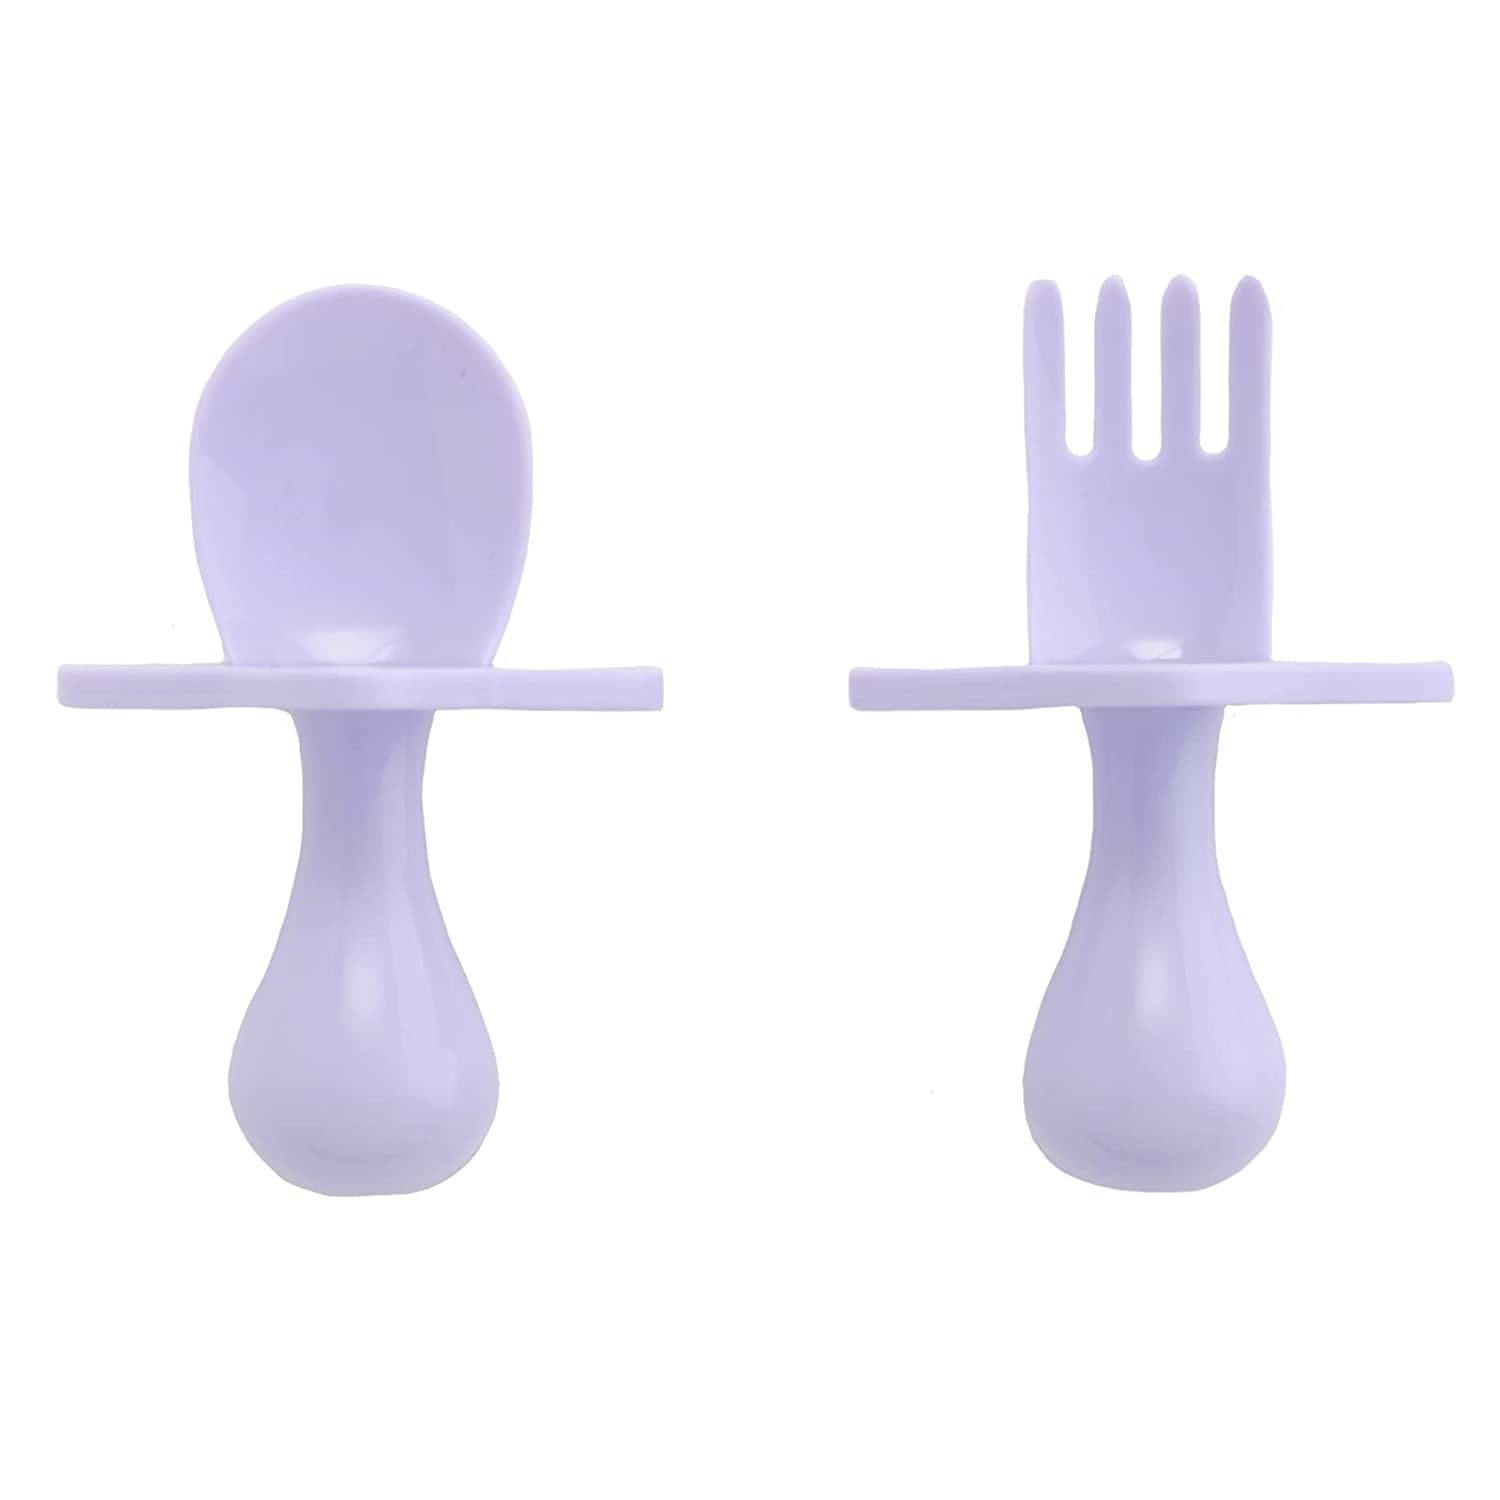 Up To 50% Off on Self Feed Baby Utensils with